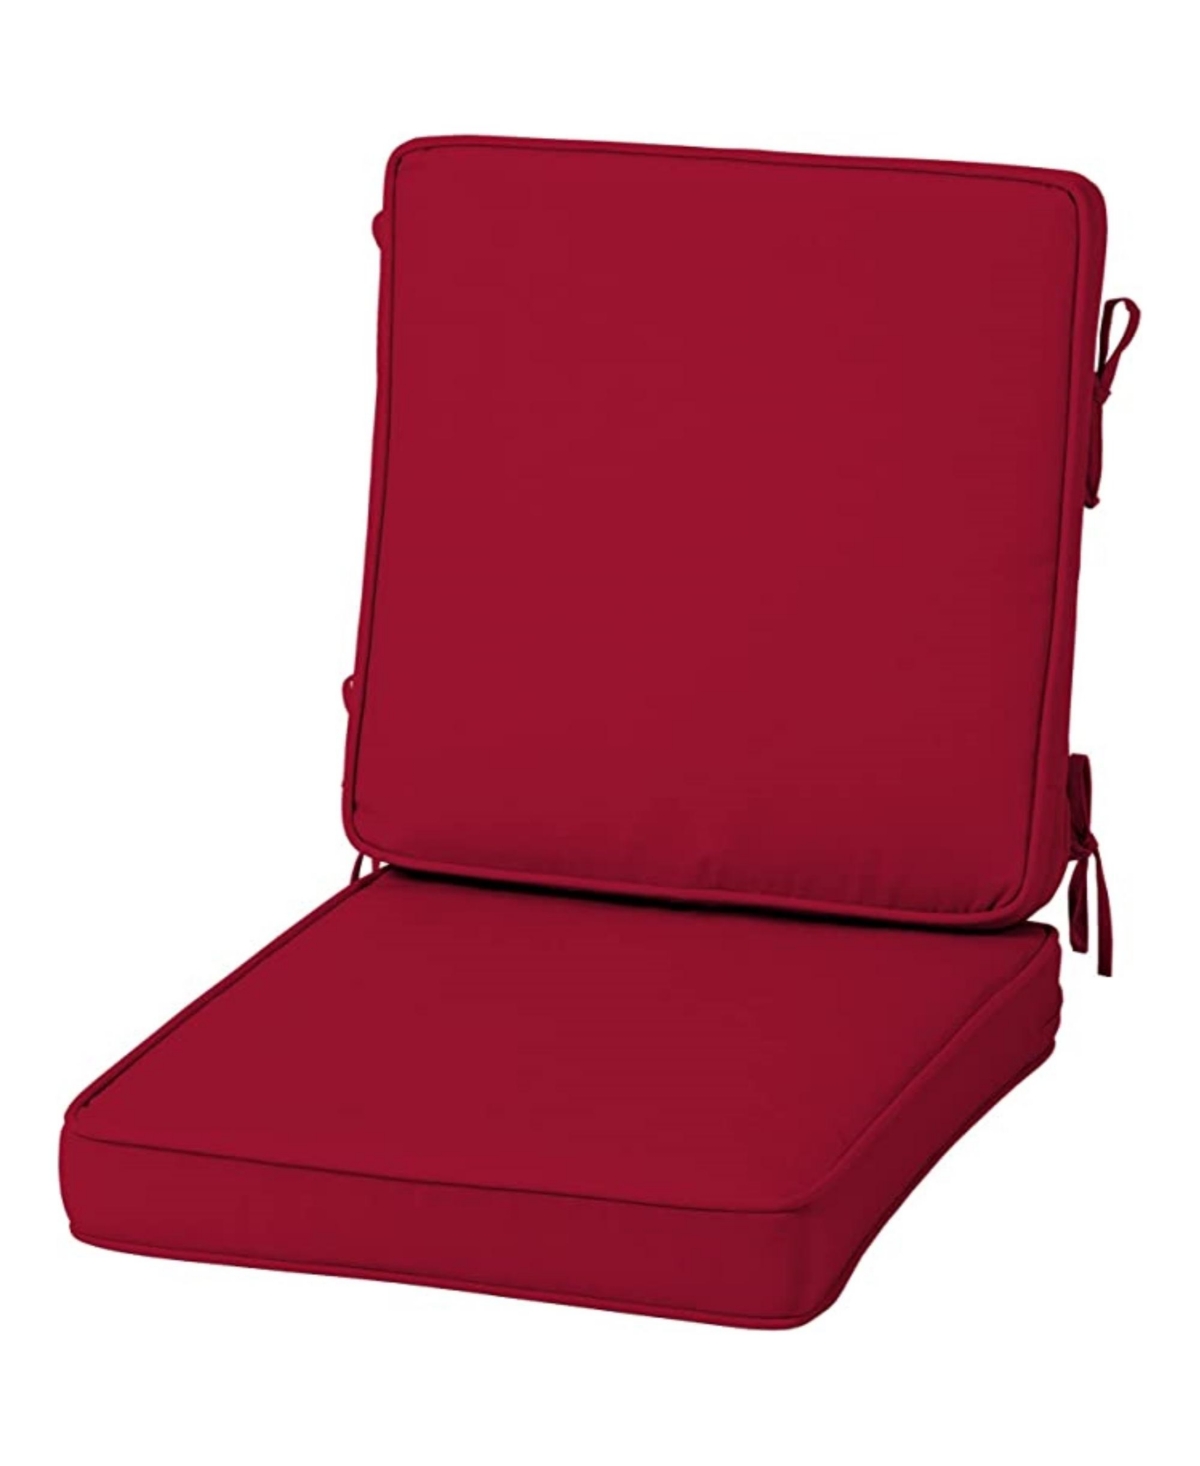 Acrylic Foam Chair Cushion 20In x 20In Red - Red